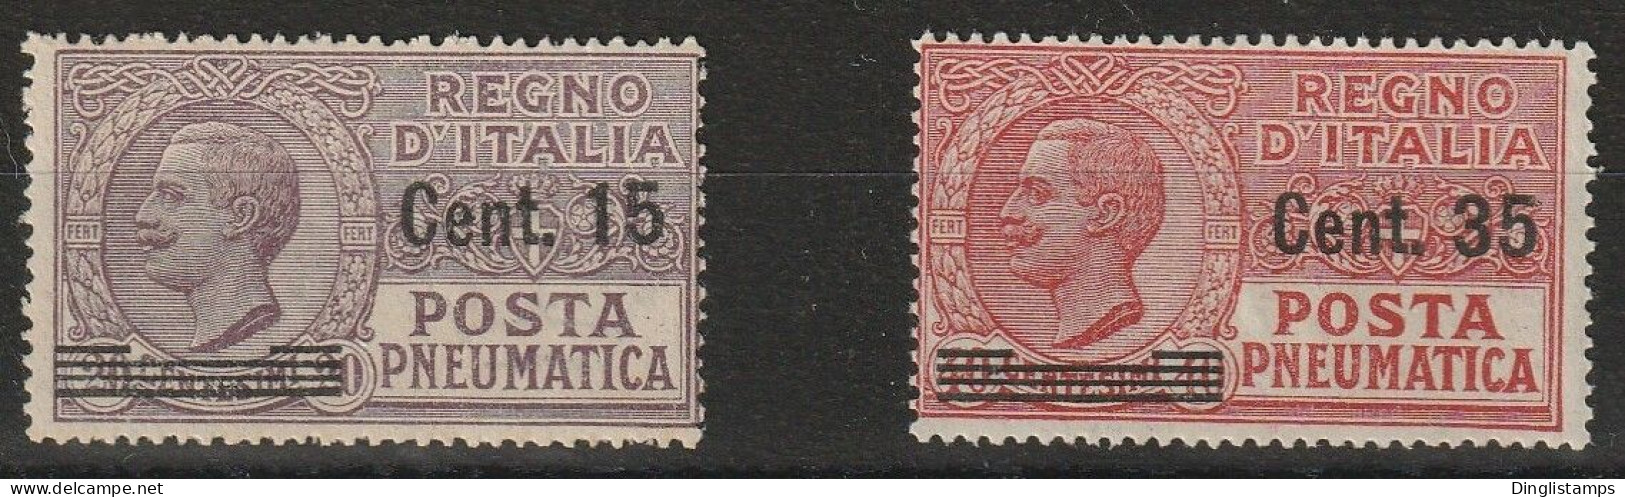 ITALY - 1927, Pneumatic Post - Mint/hinged